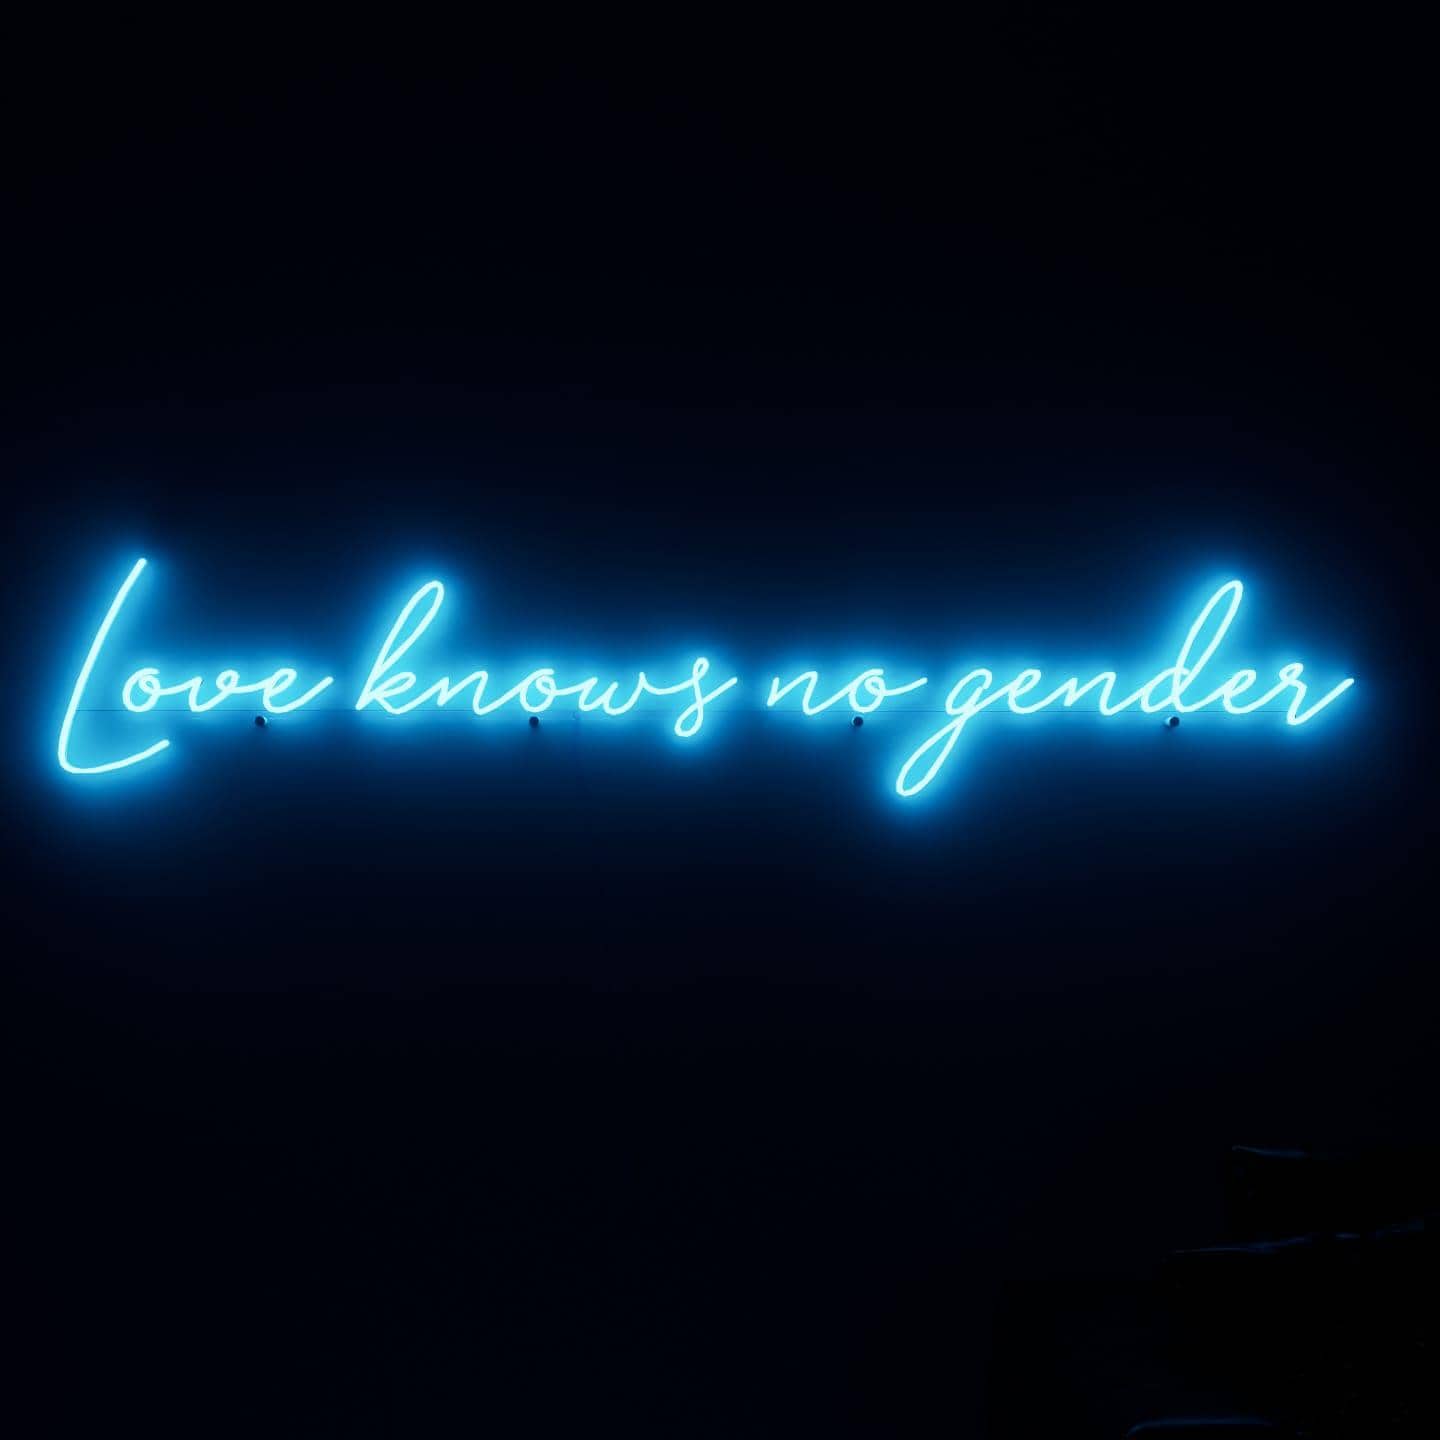 dark-night-shot-with-lit-blue-neon-lights-hanging-on-the-wall-for-display-love-knows-no-gender